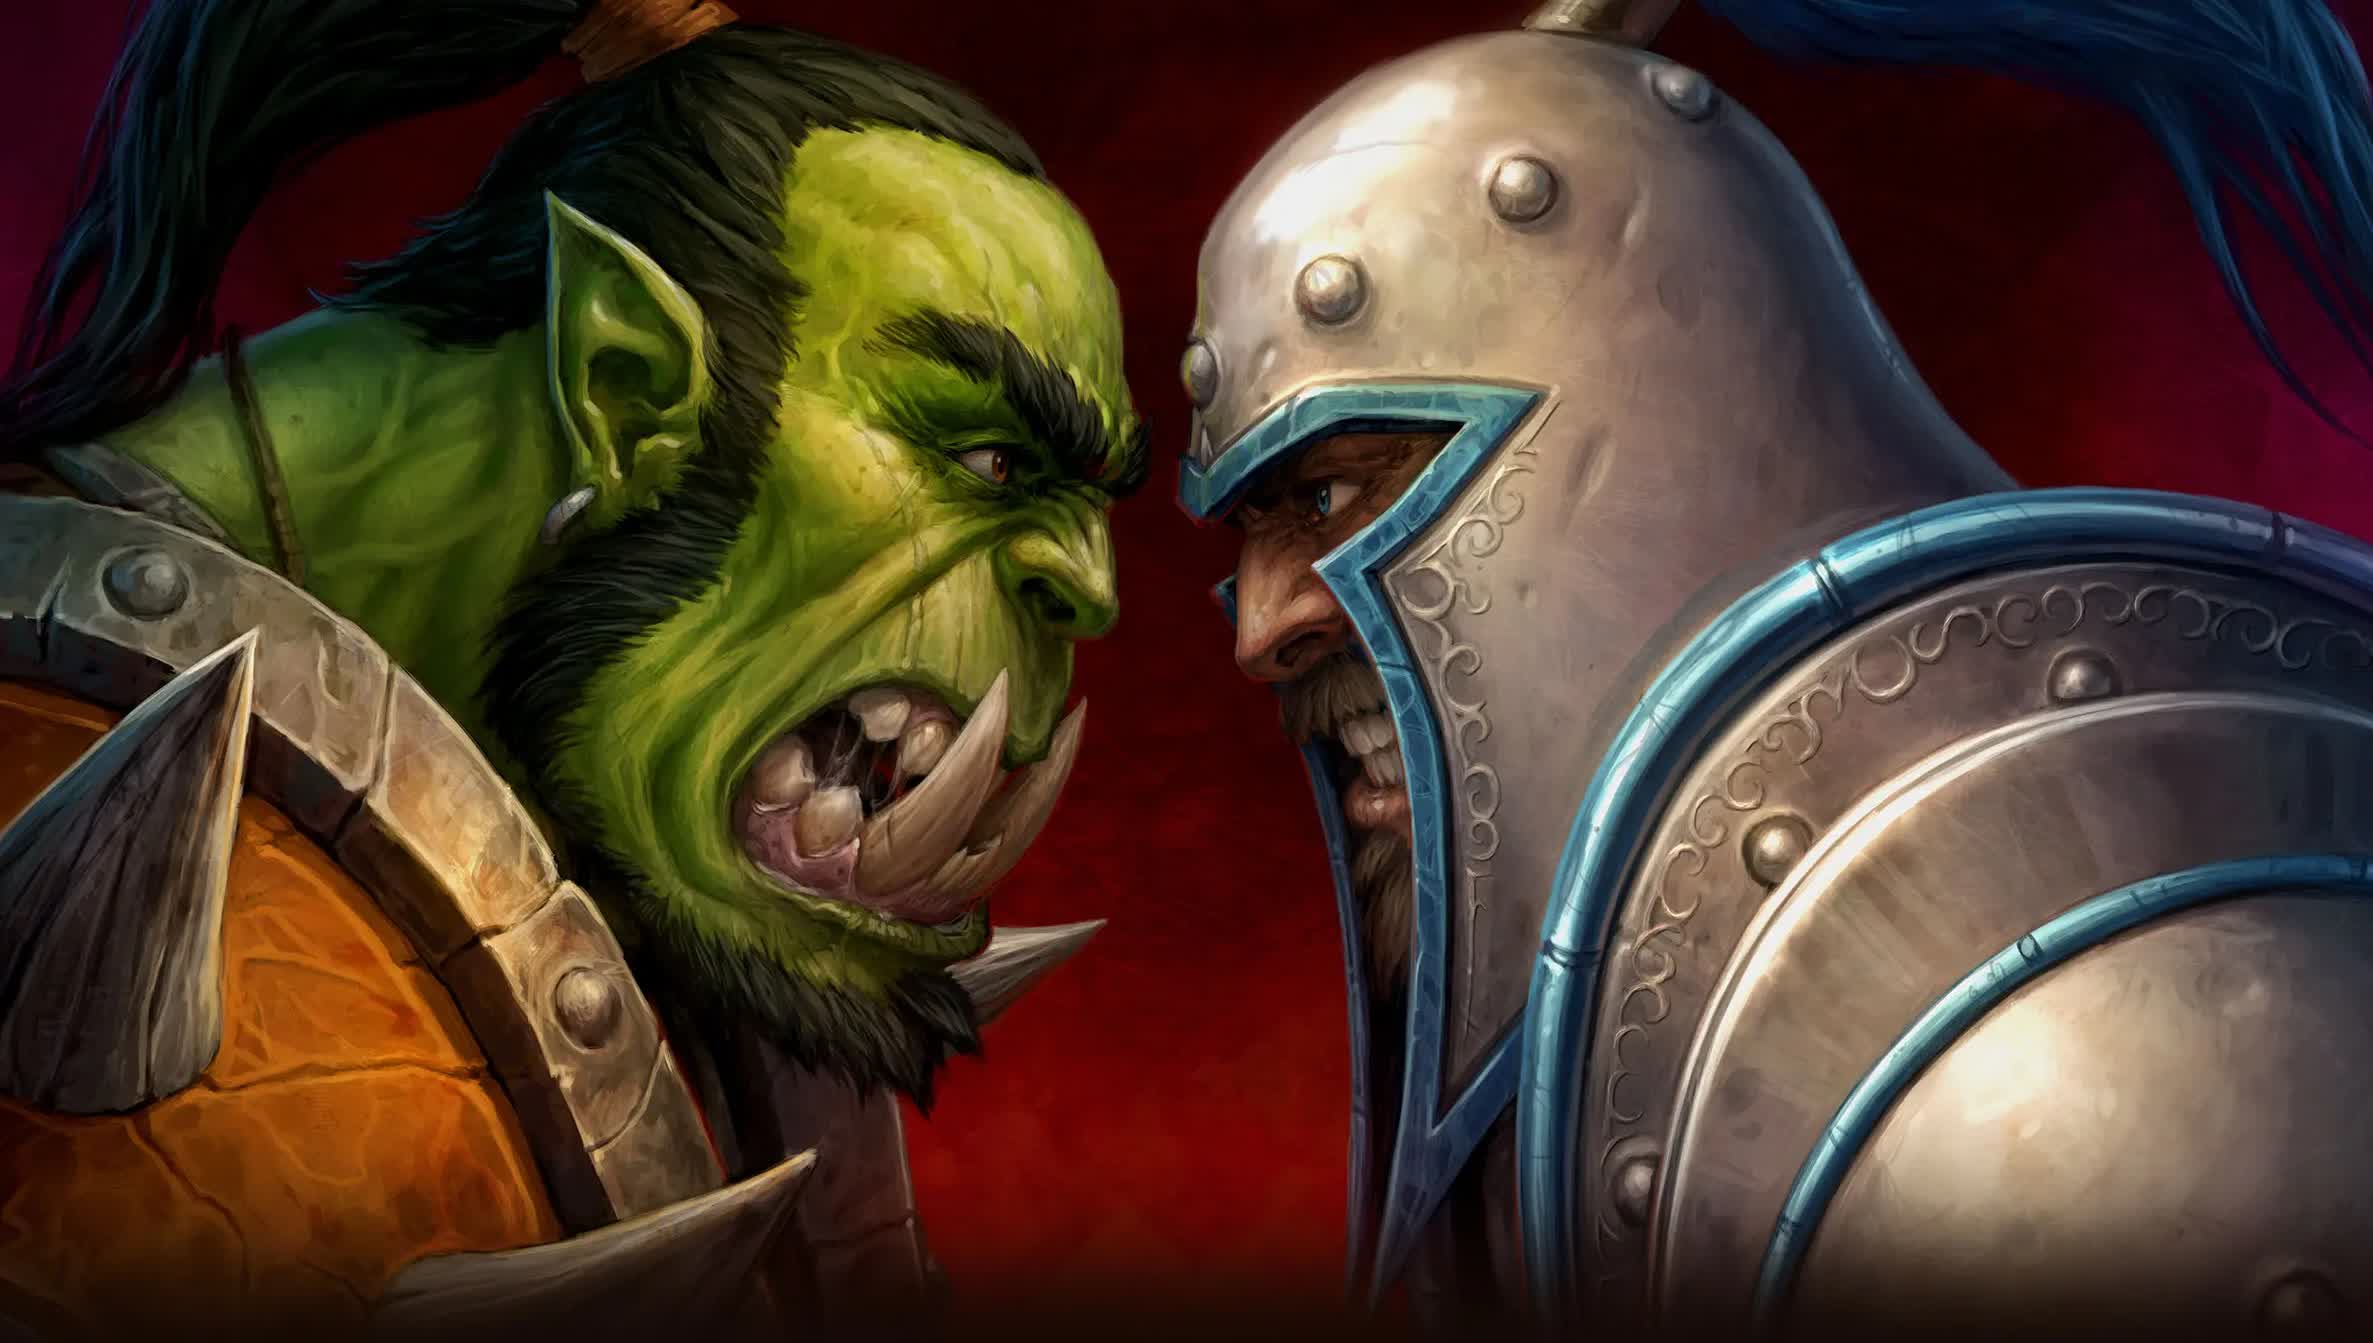 Blizzard will share Warcraft mobile game details on May 3